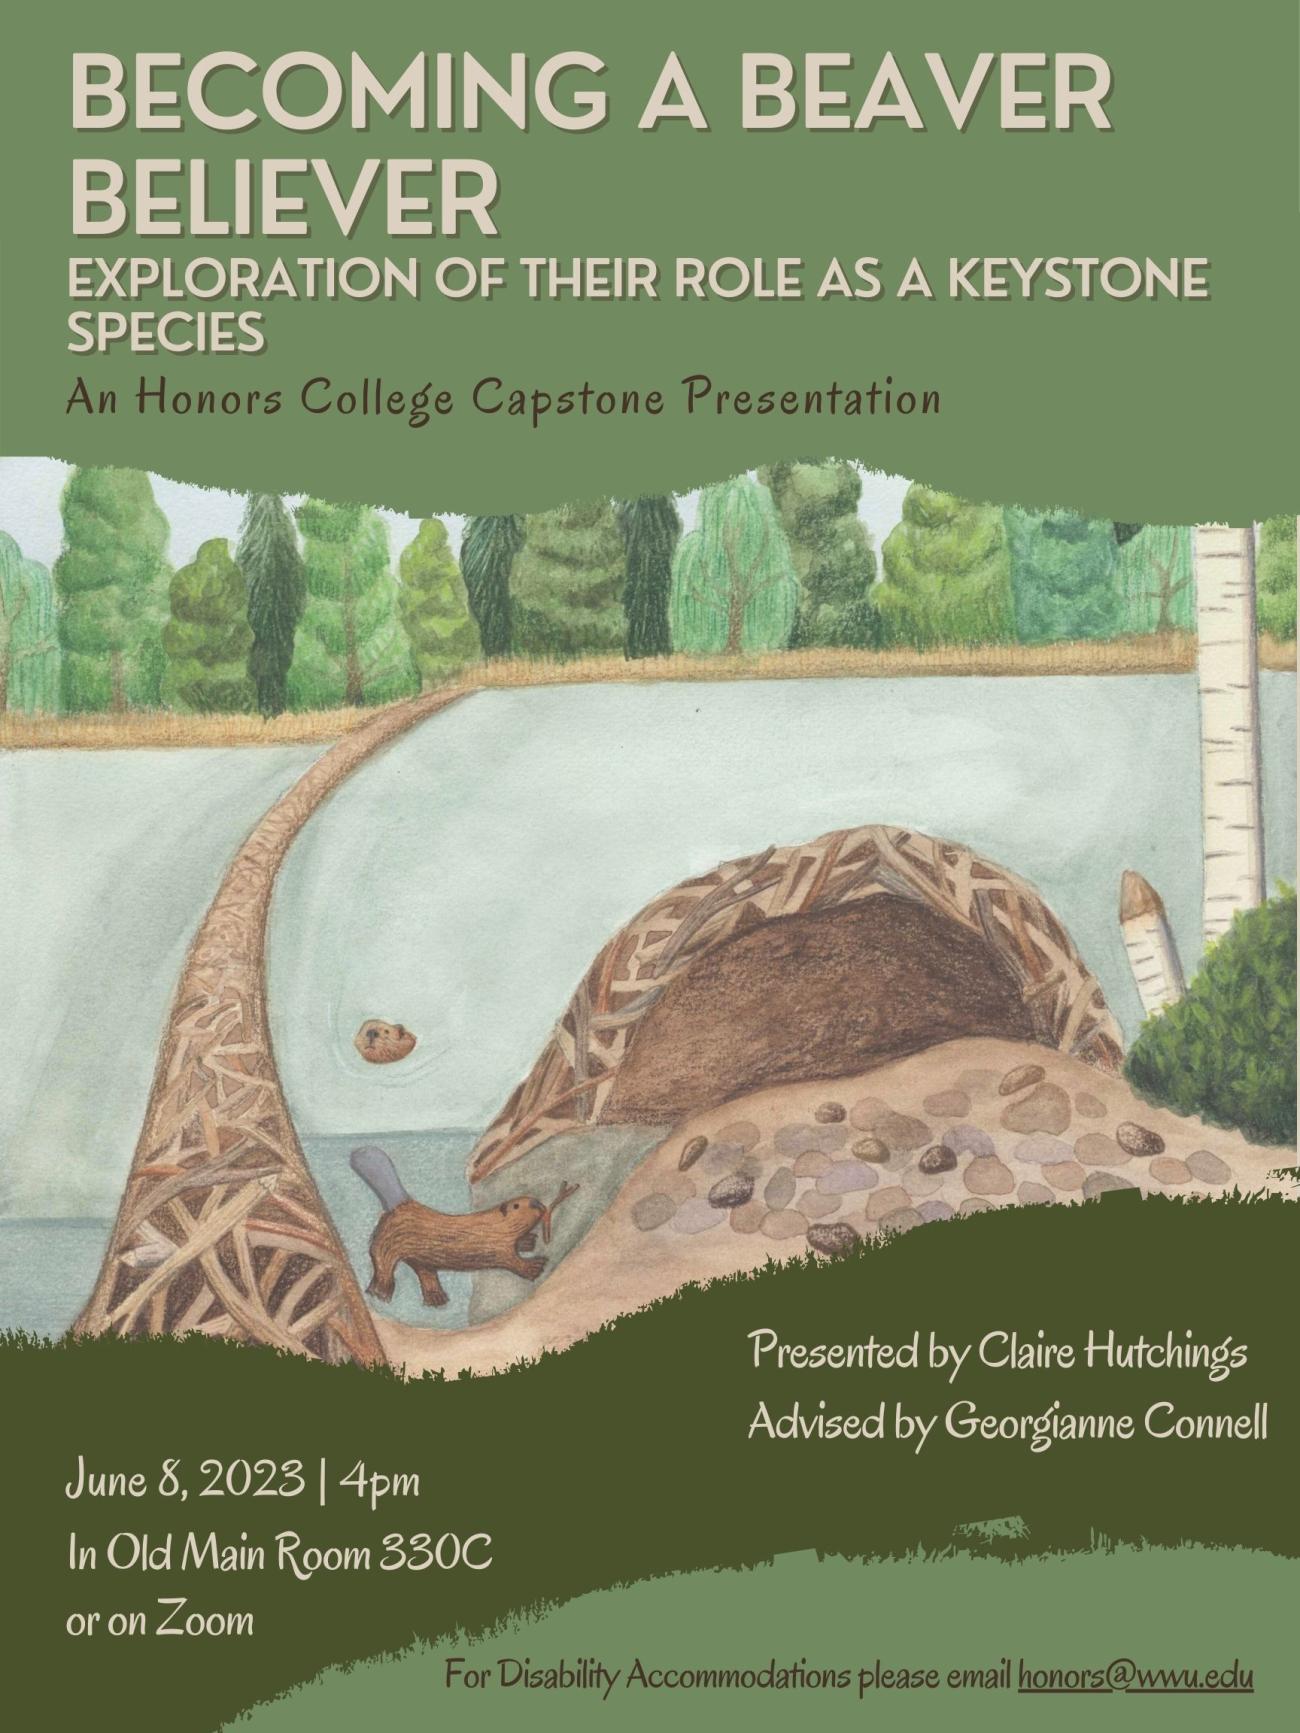 A poster with organic green shapes bordering an illustration of beavers in their pond from above and below. Text reads: "Becoming a Beaver Believer. Exploration of their role as a keystone species. An Honors College Capstone Presentation. Presented by Claire Hutchings, Advised by Georgianne Connell. June 8, 2023. 4 pm. In Old Main Room 330C or on Zoom. For disability accommodations, please email honors@wwu.edu."